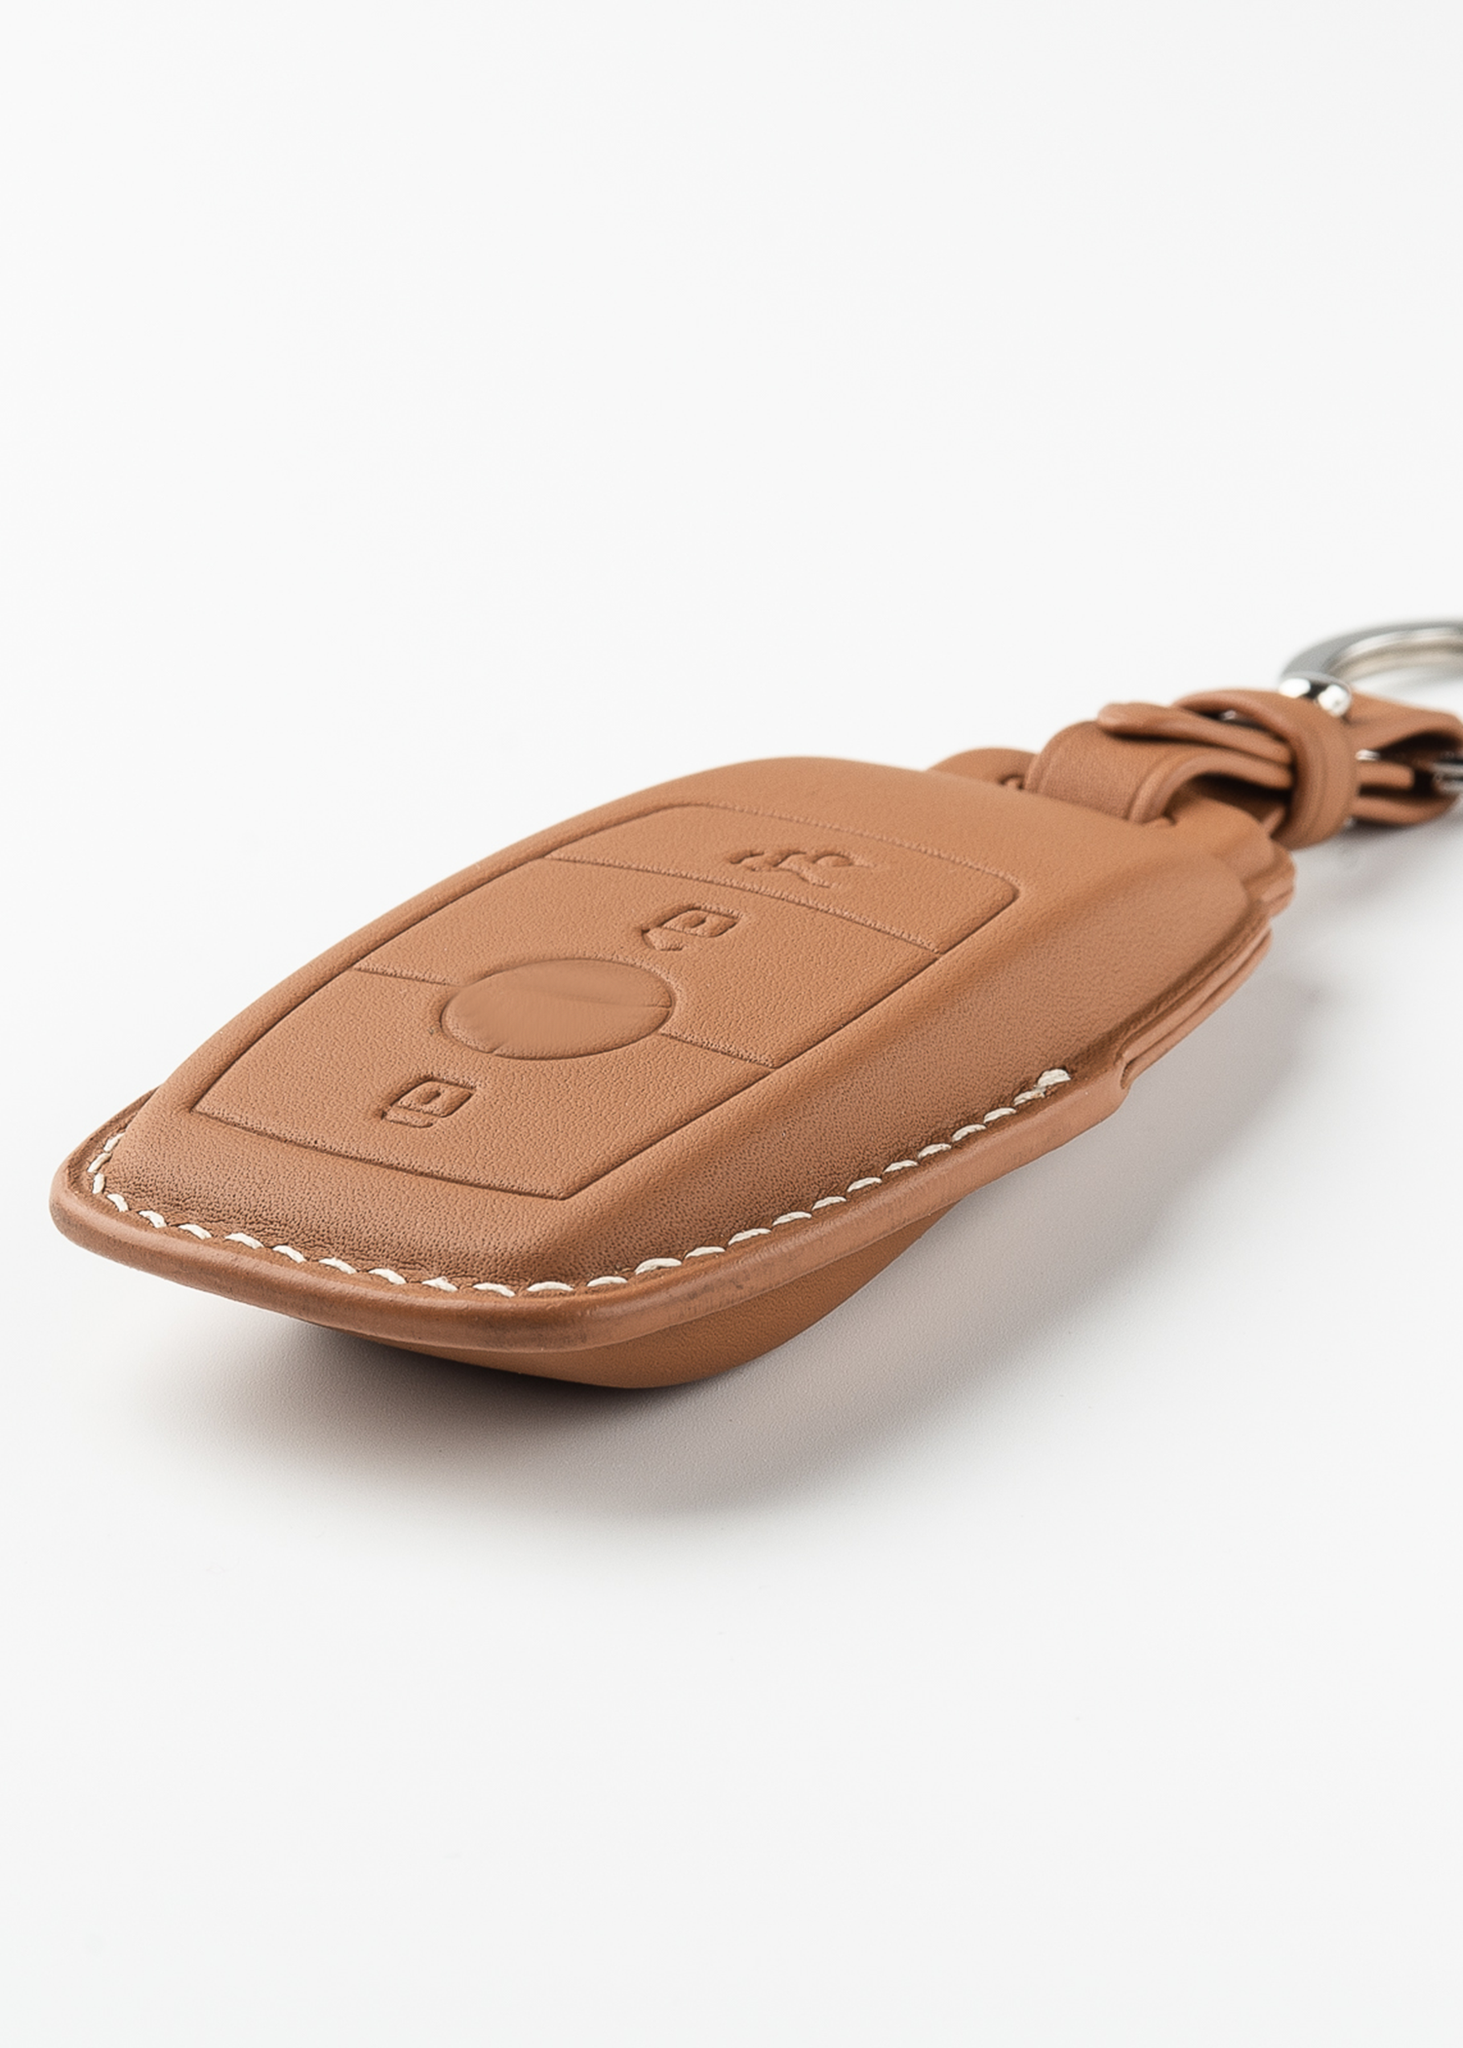 Timotheus for Mercedes key fob cover case, Compatible with Mercedes key case, Handmade Genuine Leather for Mercedes keychains | MR22